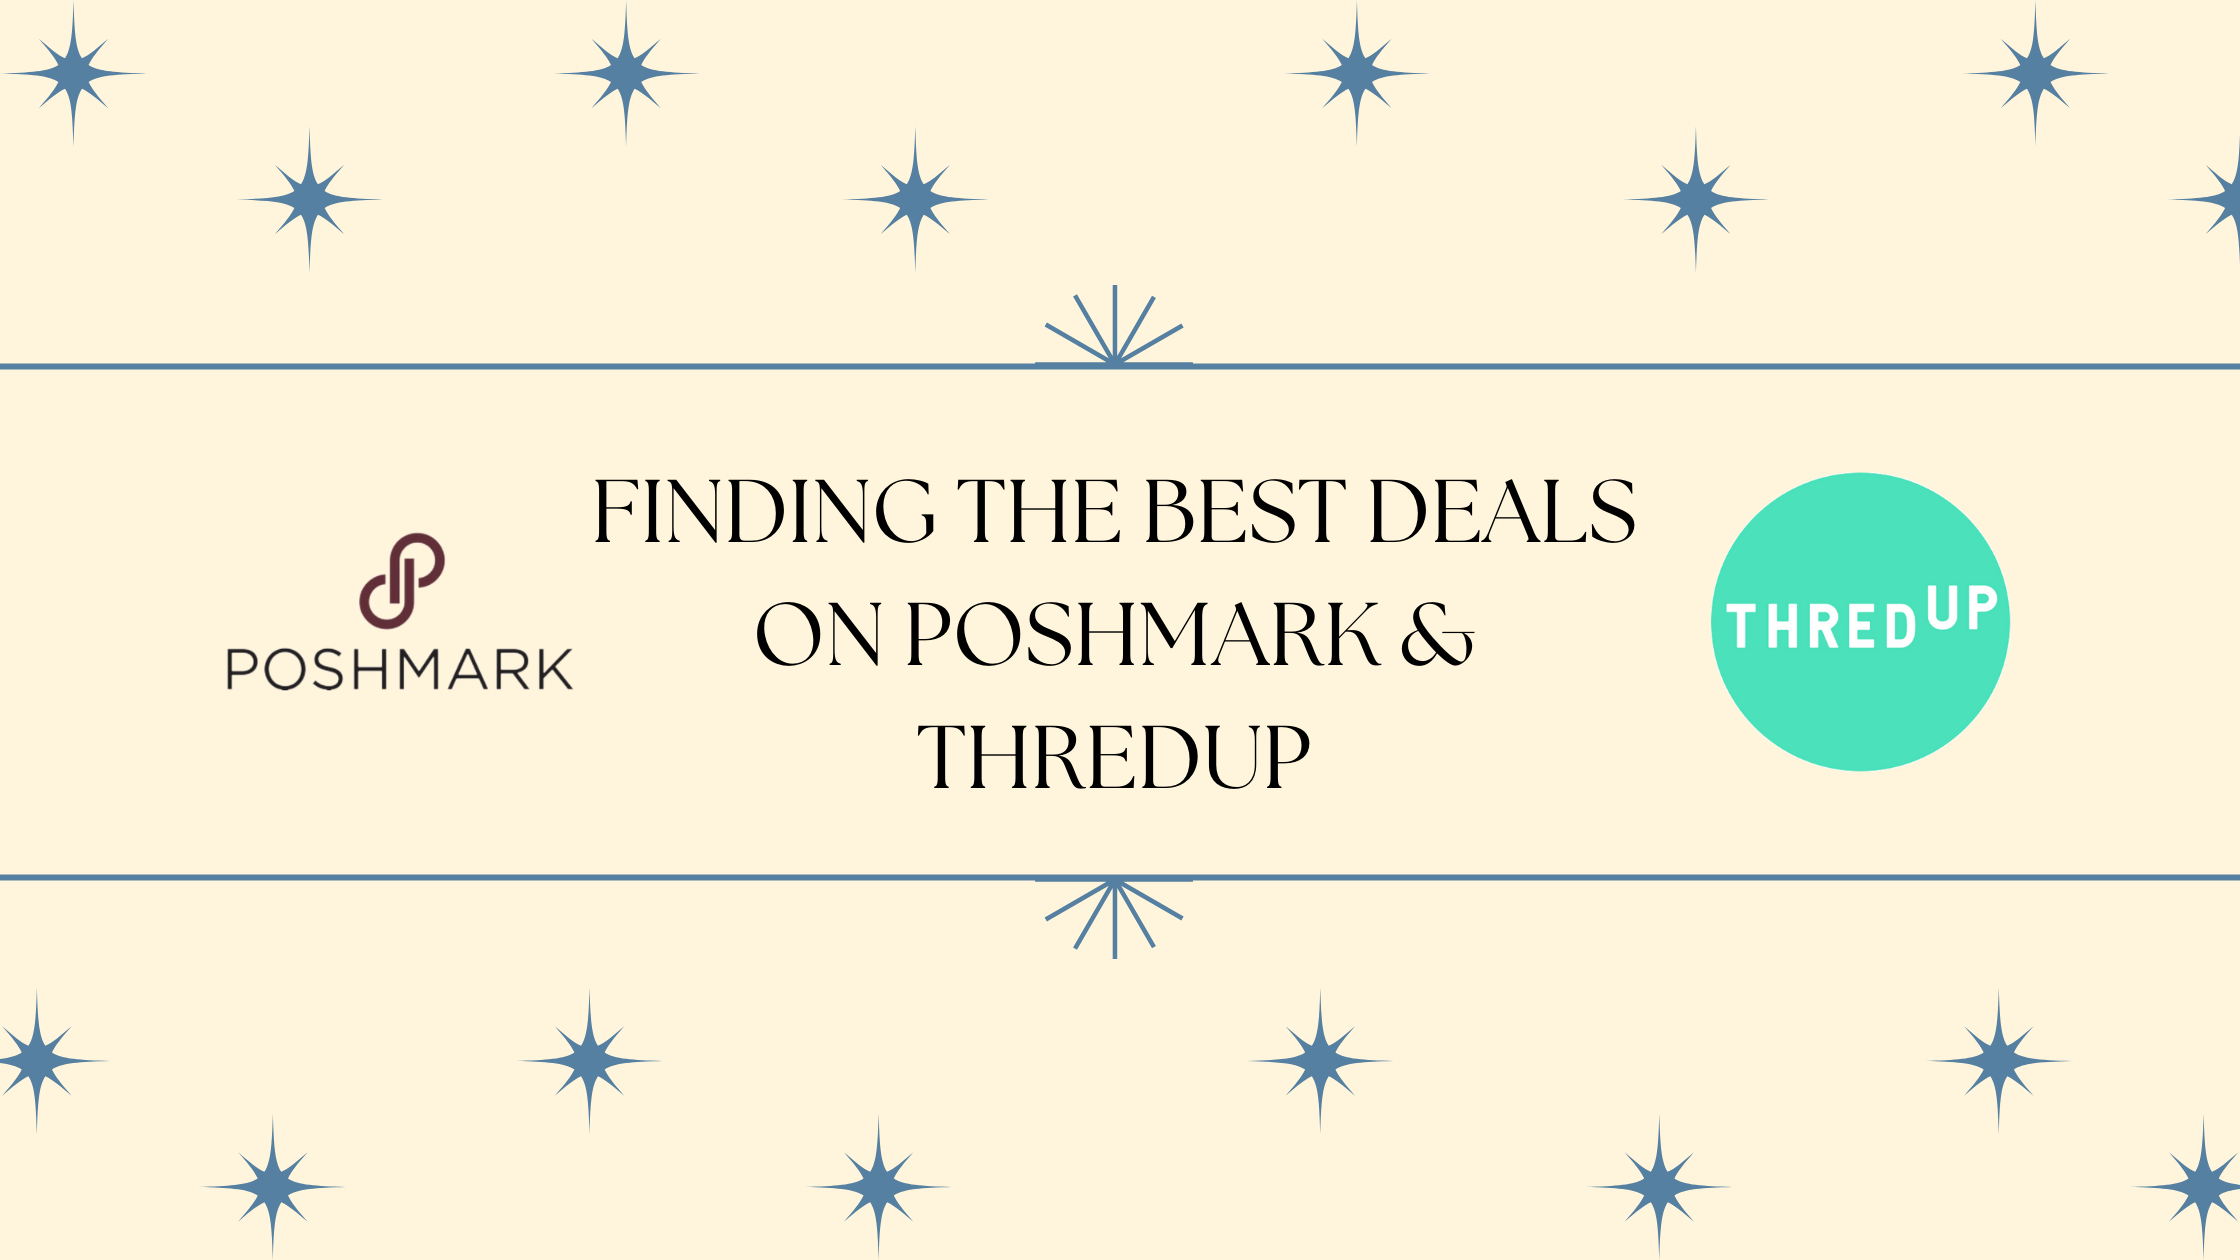 Finding the Best Deals on Poshmark and Thread Up